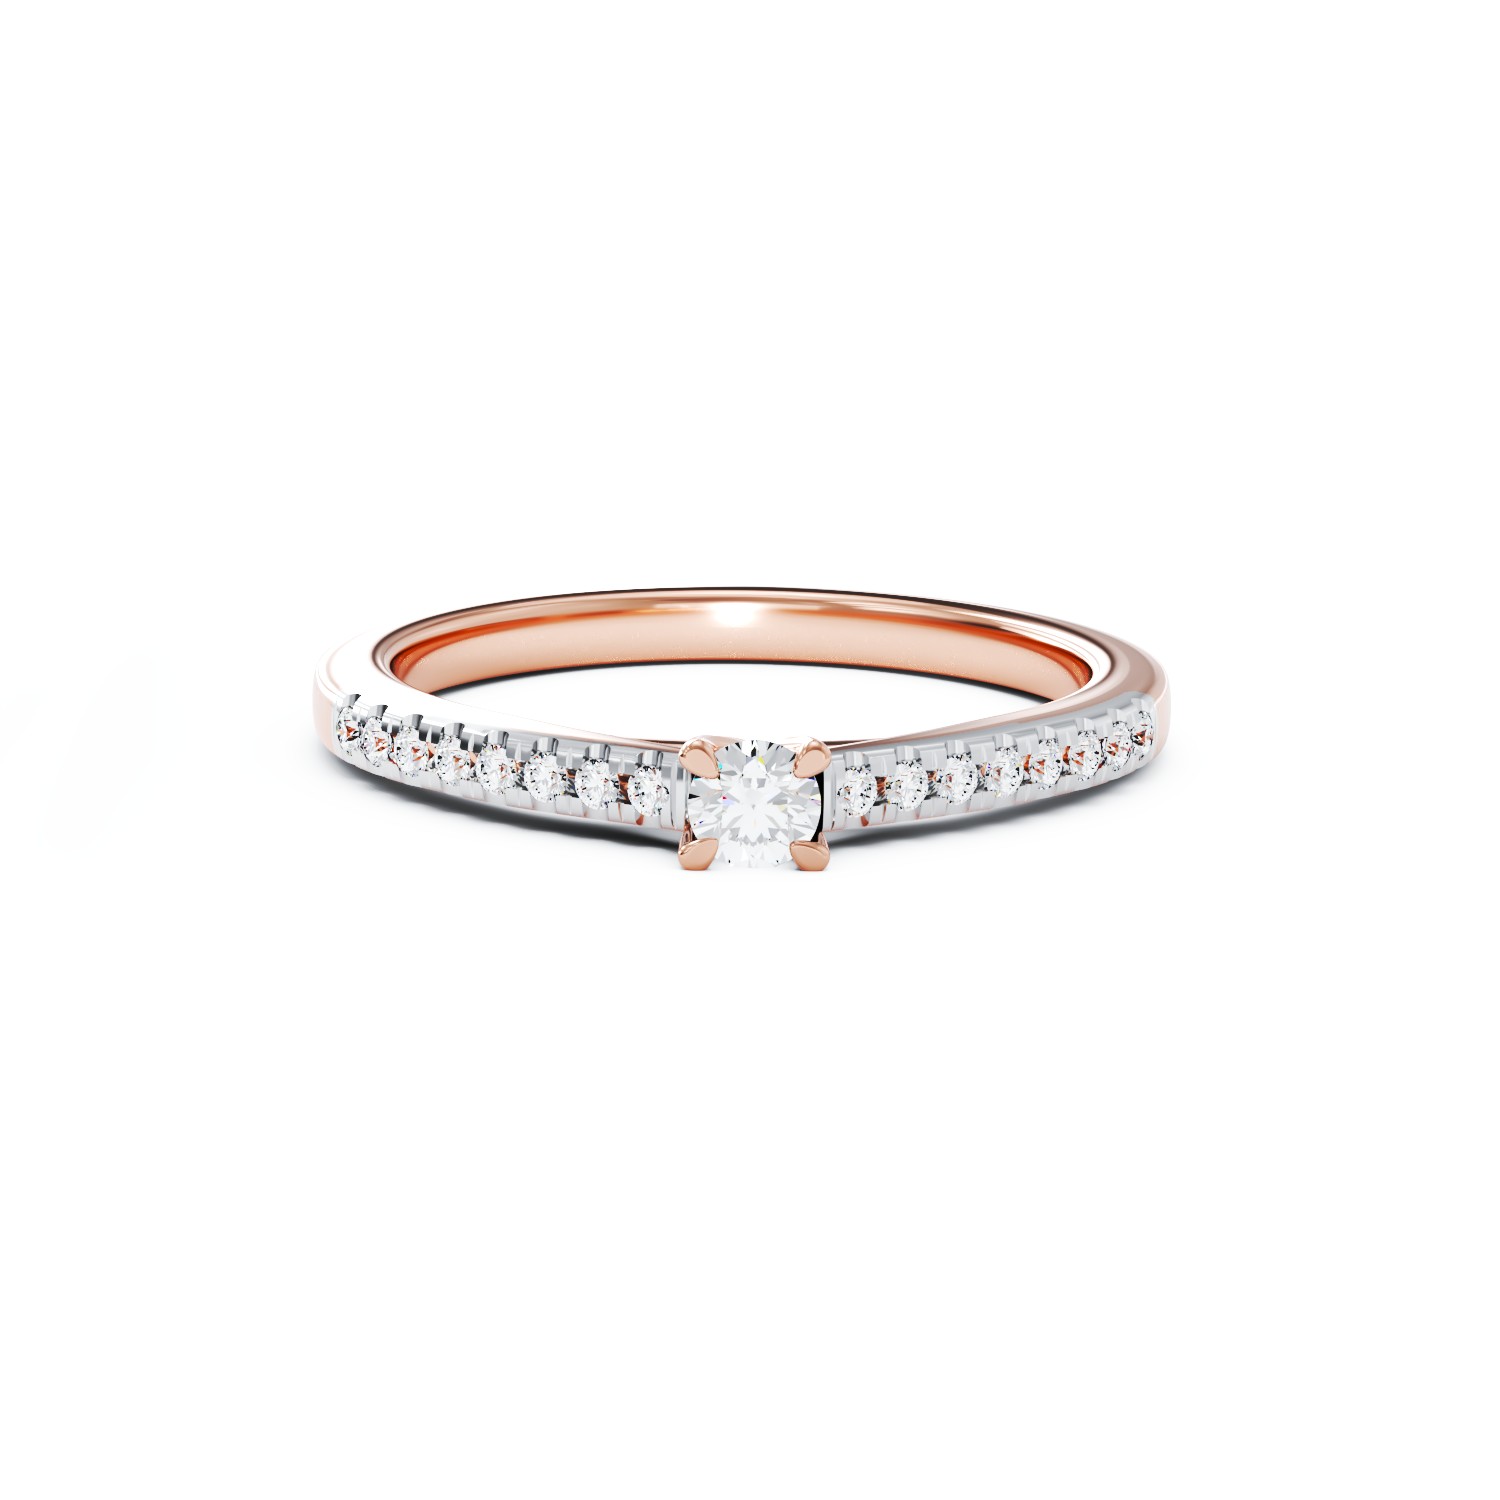 Rose gold engagement ring with 0.2ct diamonds